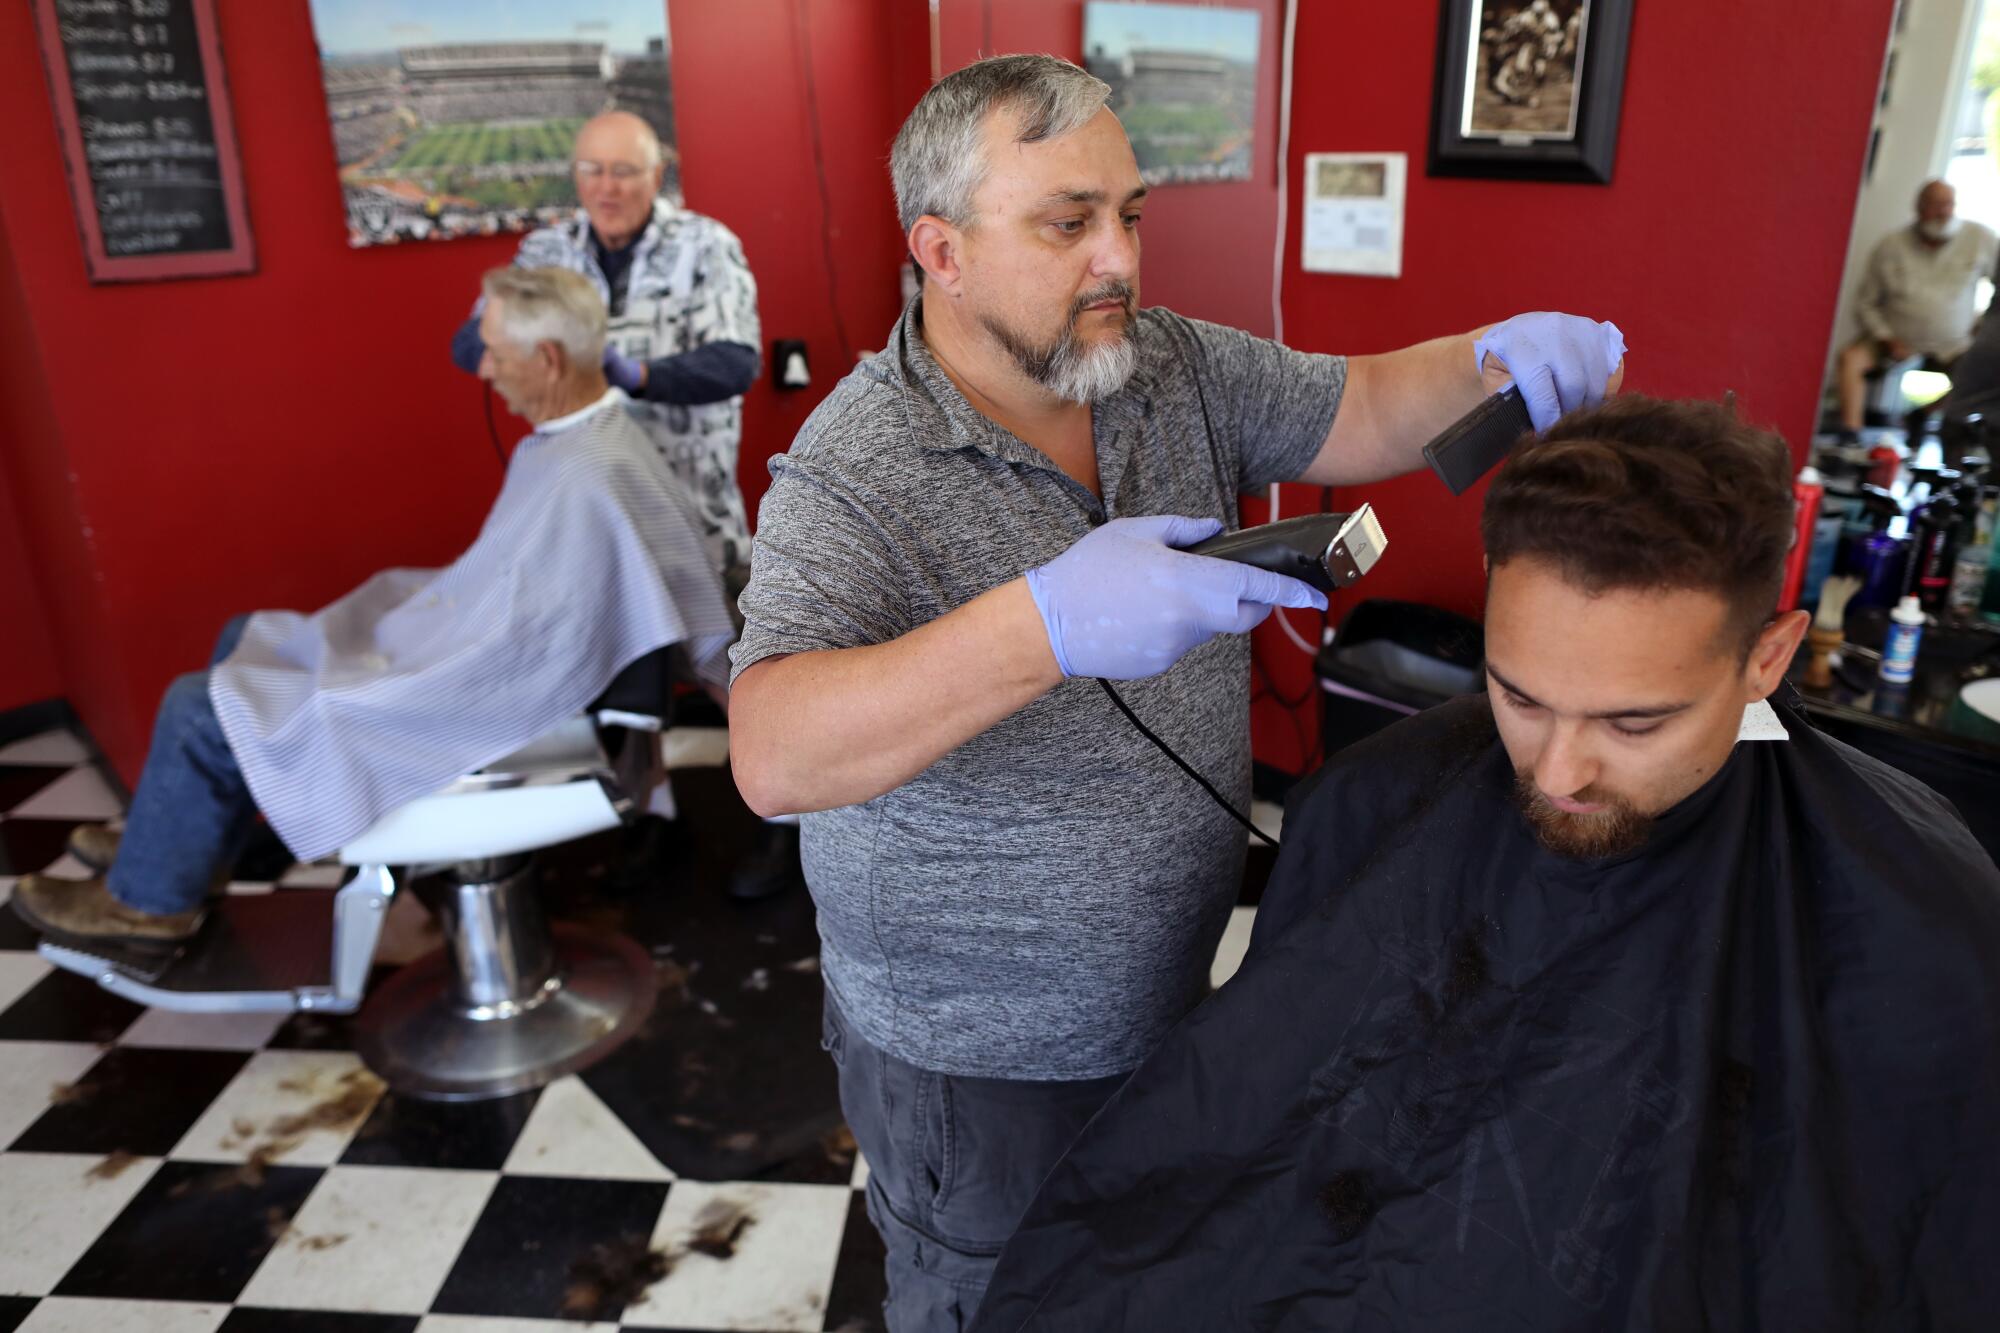 Wes Heryford cuts the hair of Ben Martin at Cutte House Barber Shop in Yuba City.